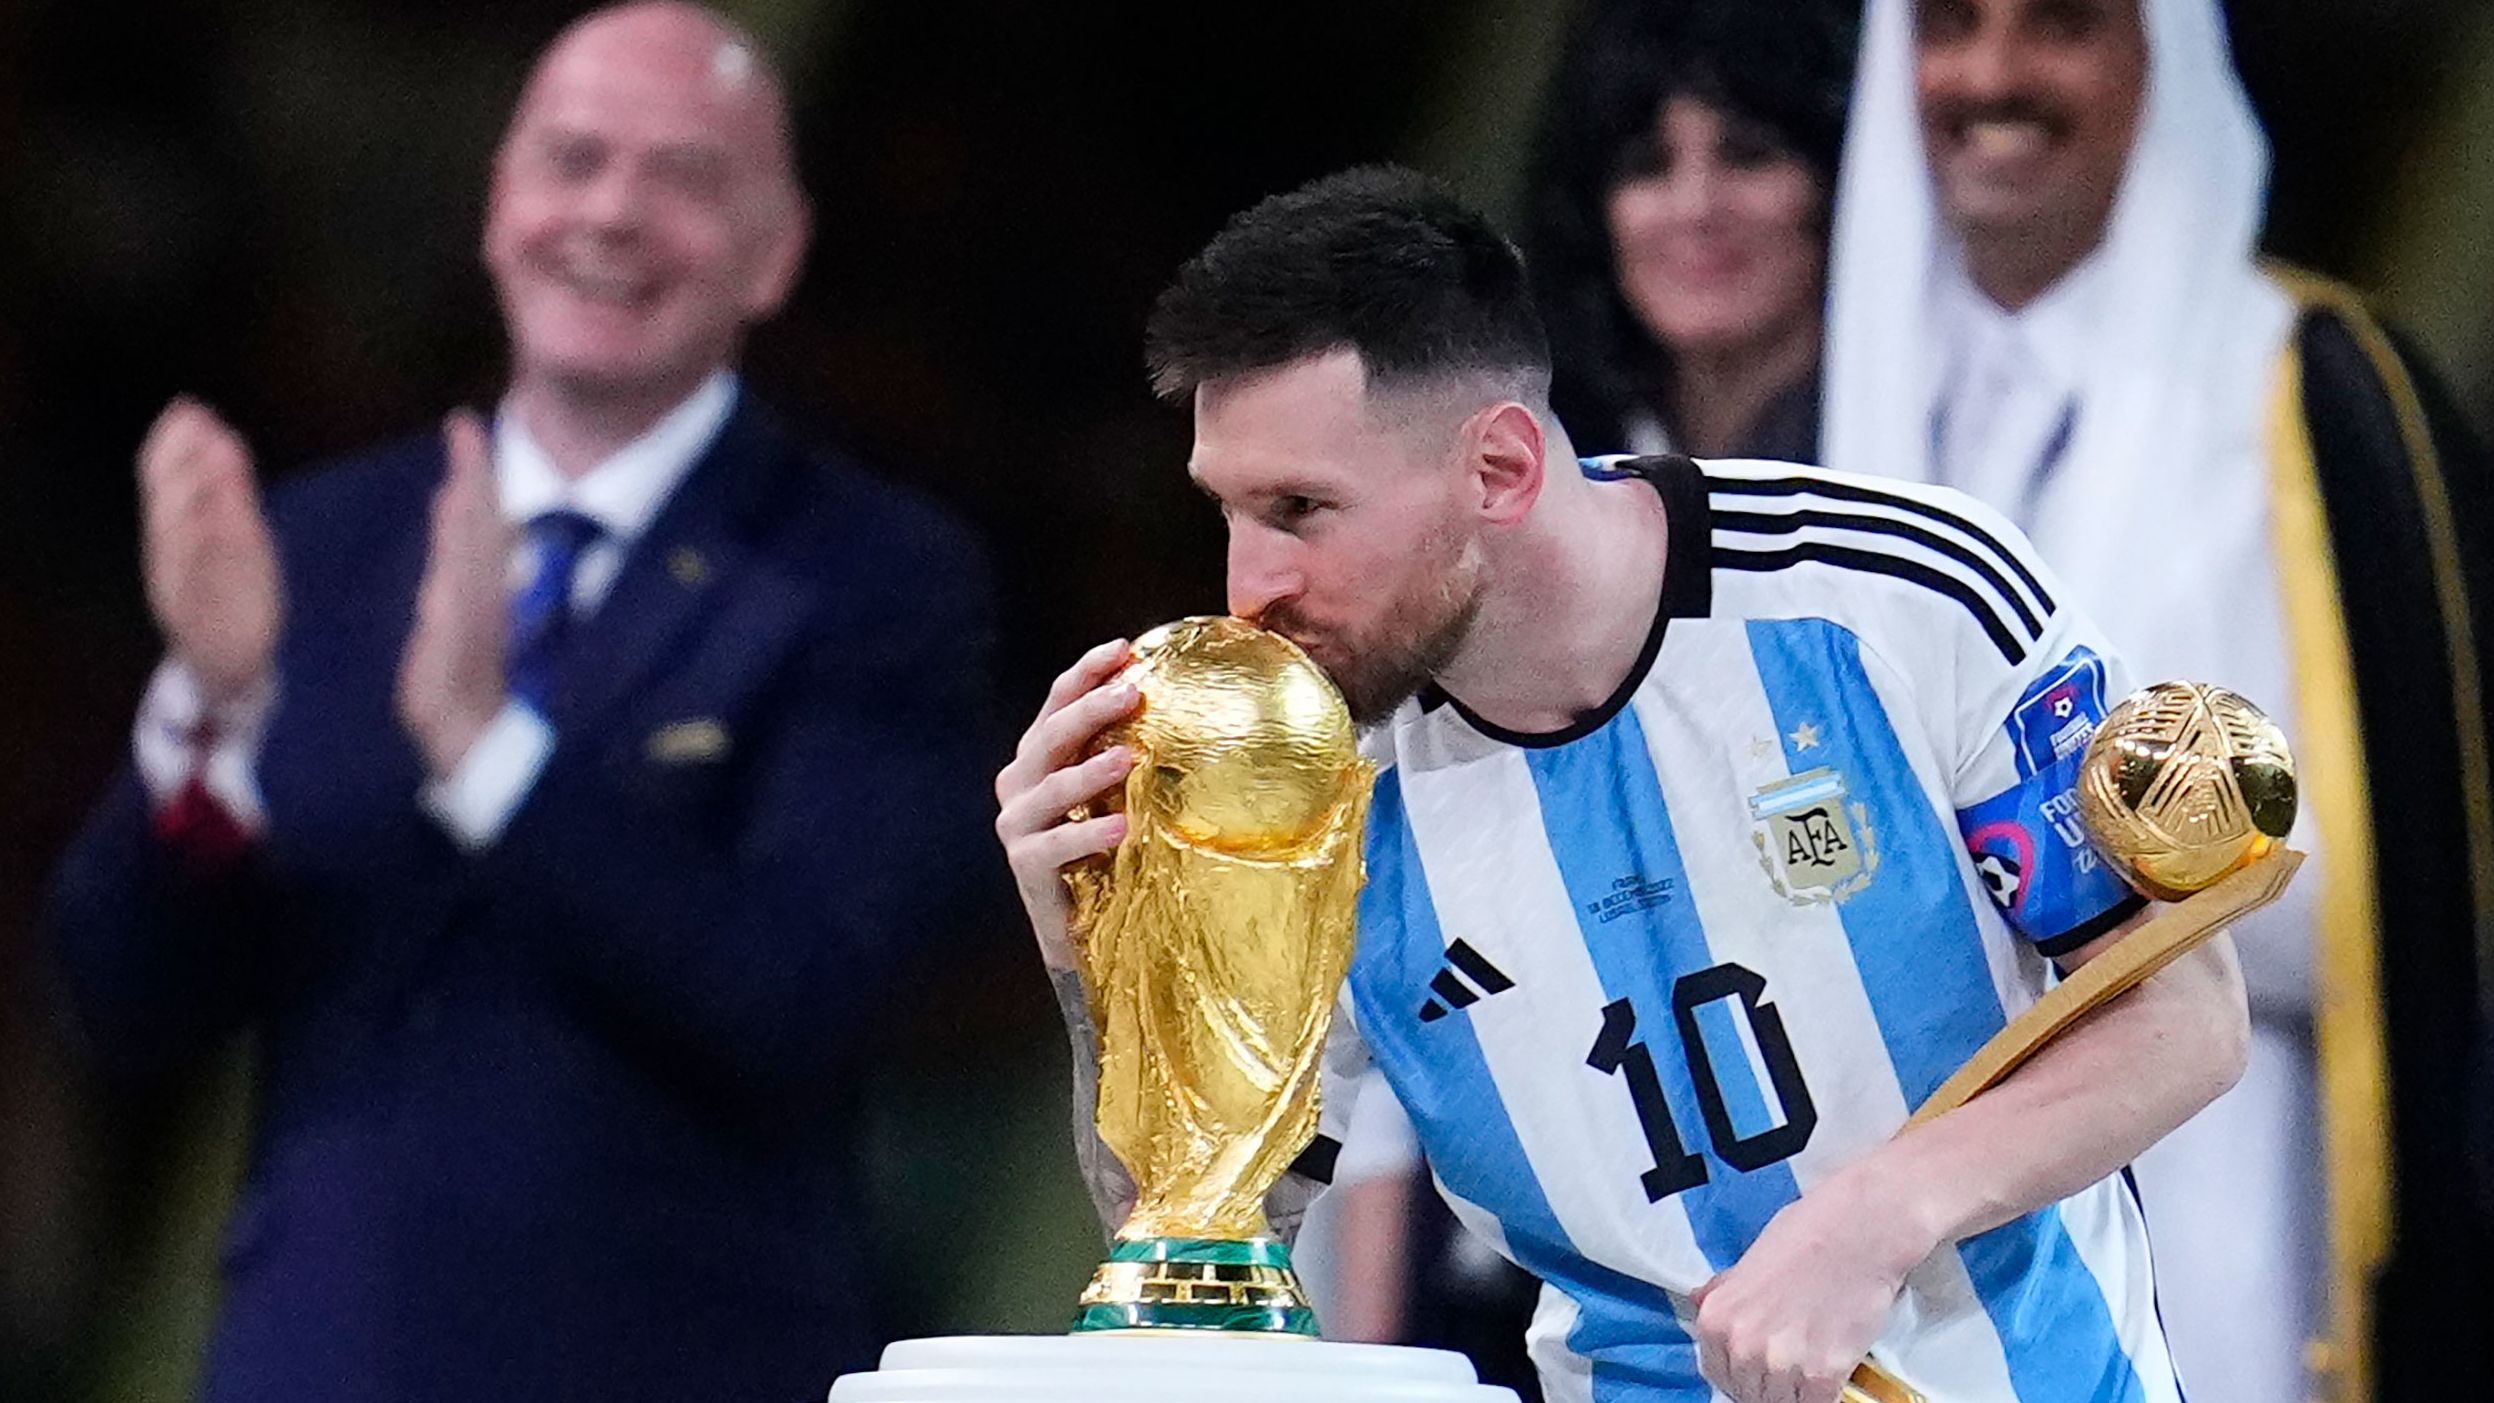 Argentina's Lionel Messi says he wants to continue 'living a few more games being world champion'